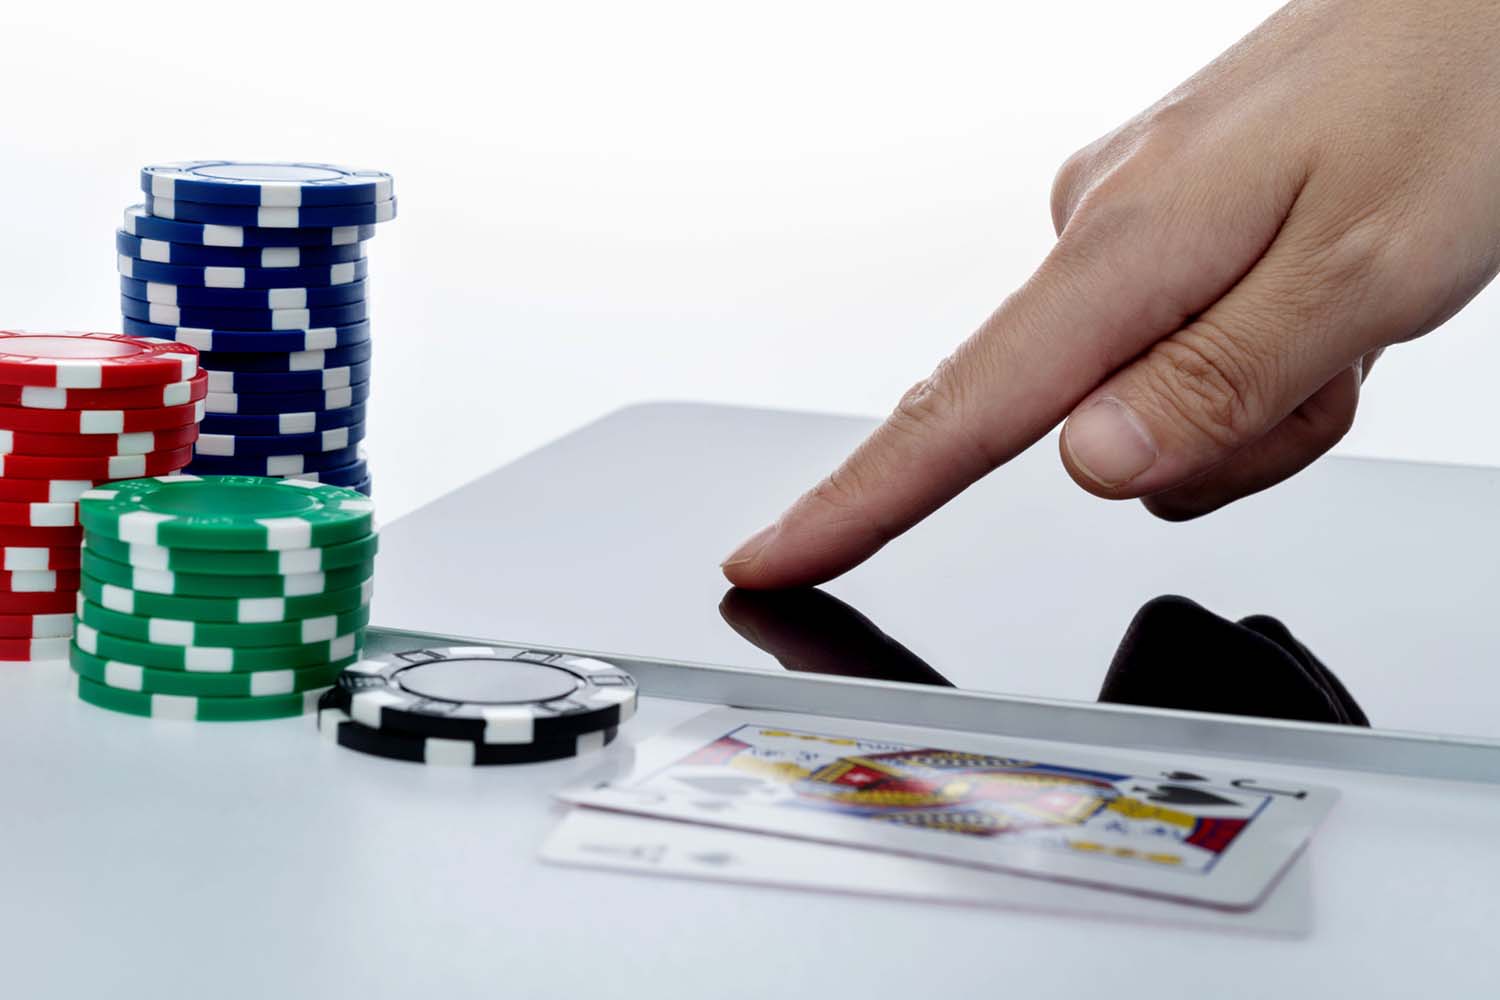 A brief history of online gambling